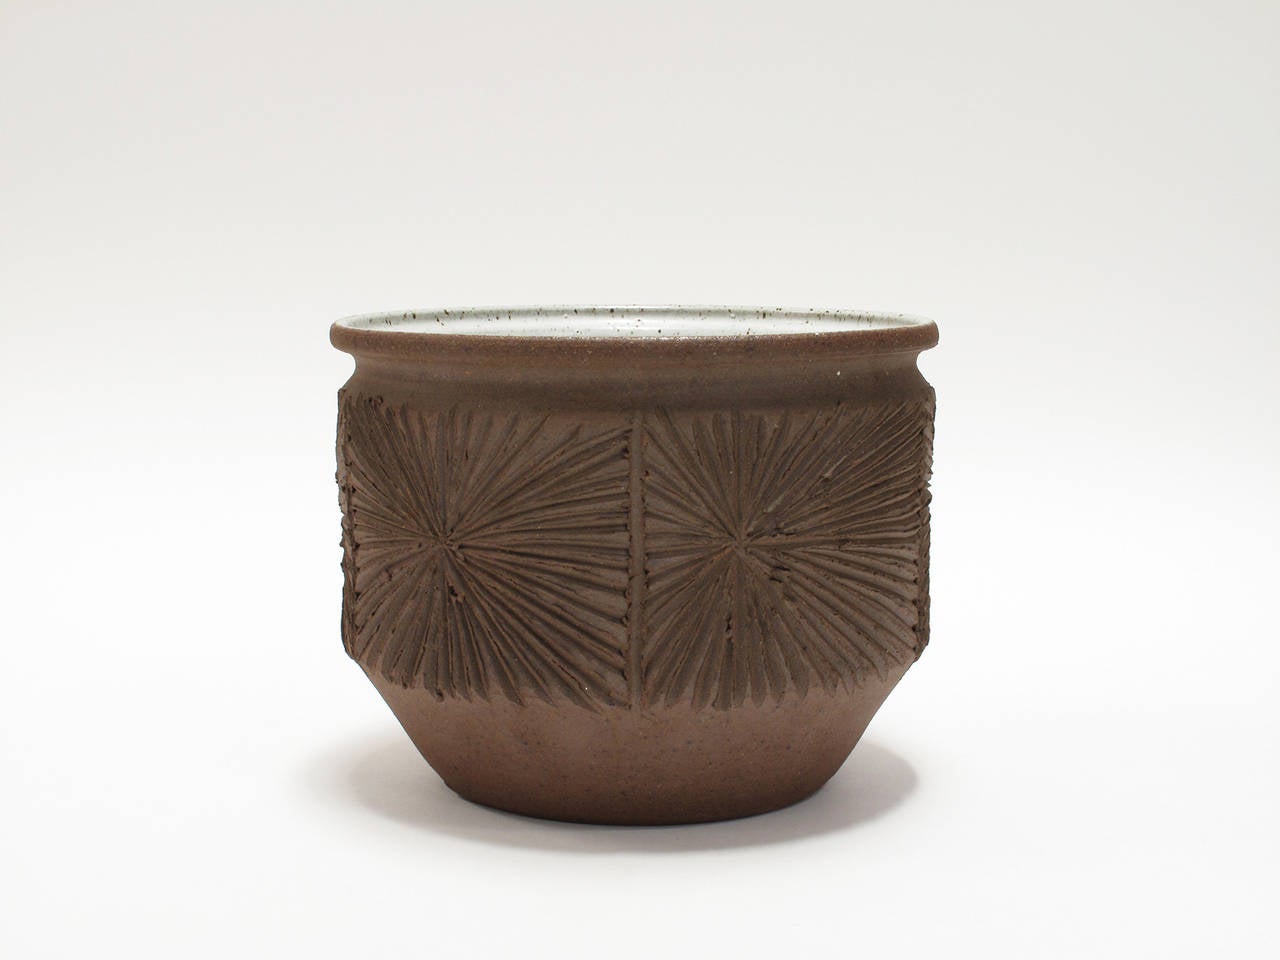 Stoneware vessel featuring an unglazed, hand-incised exterior with the 